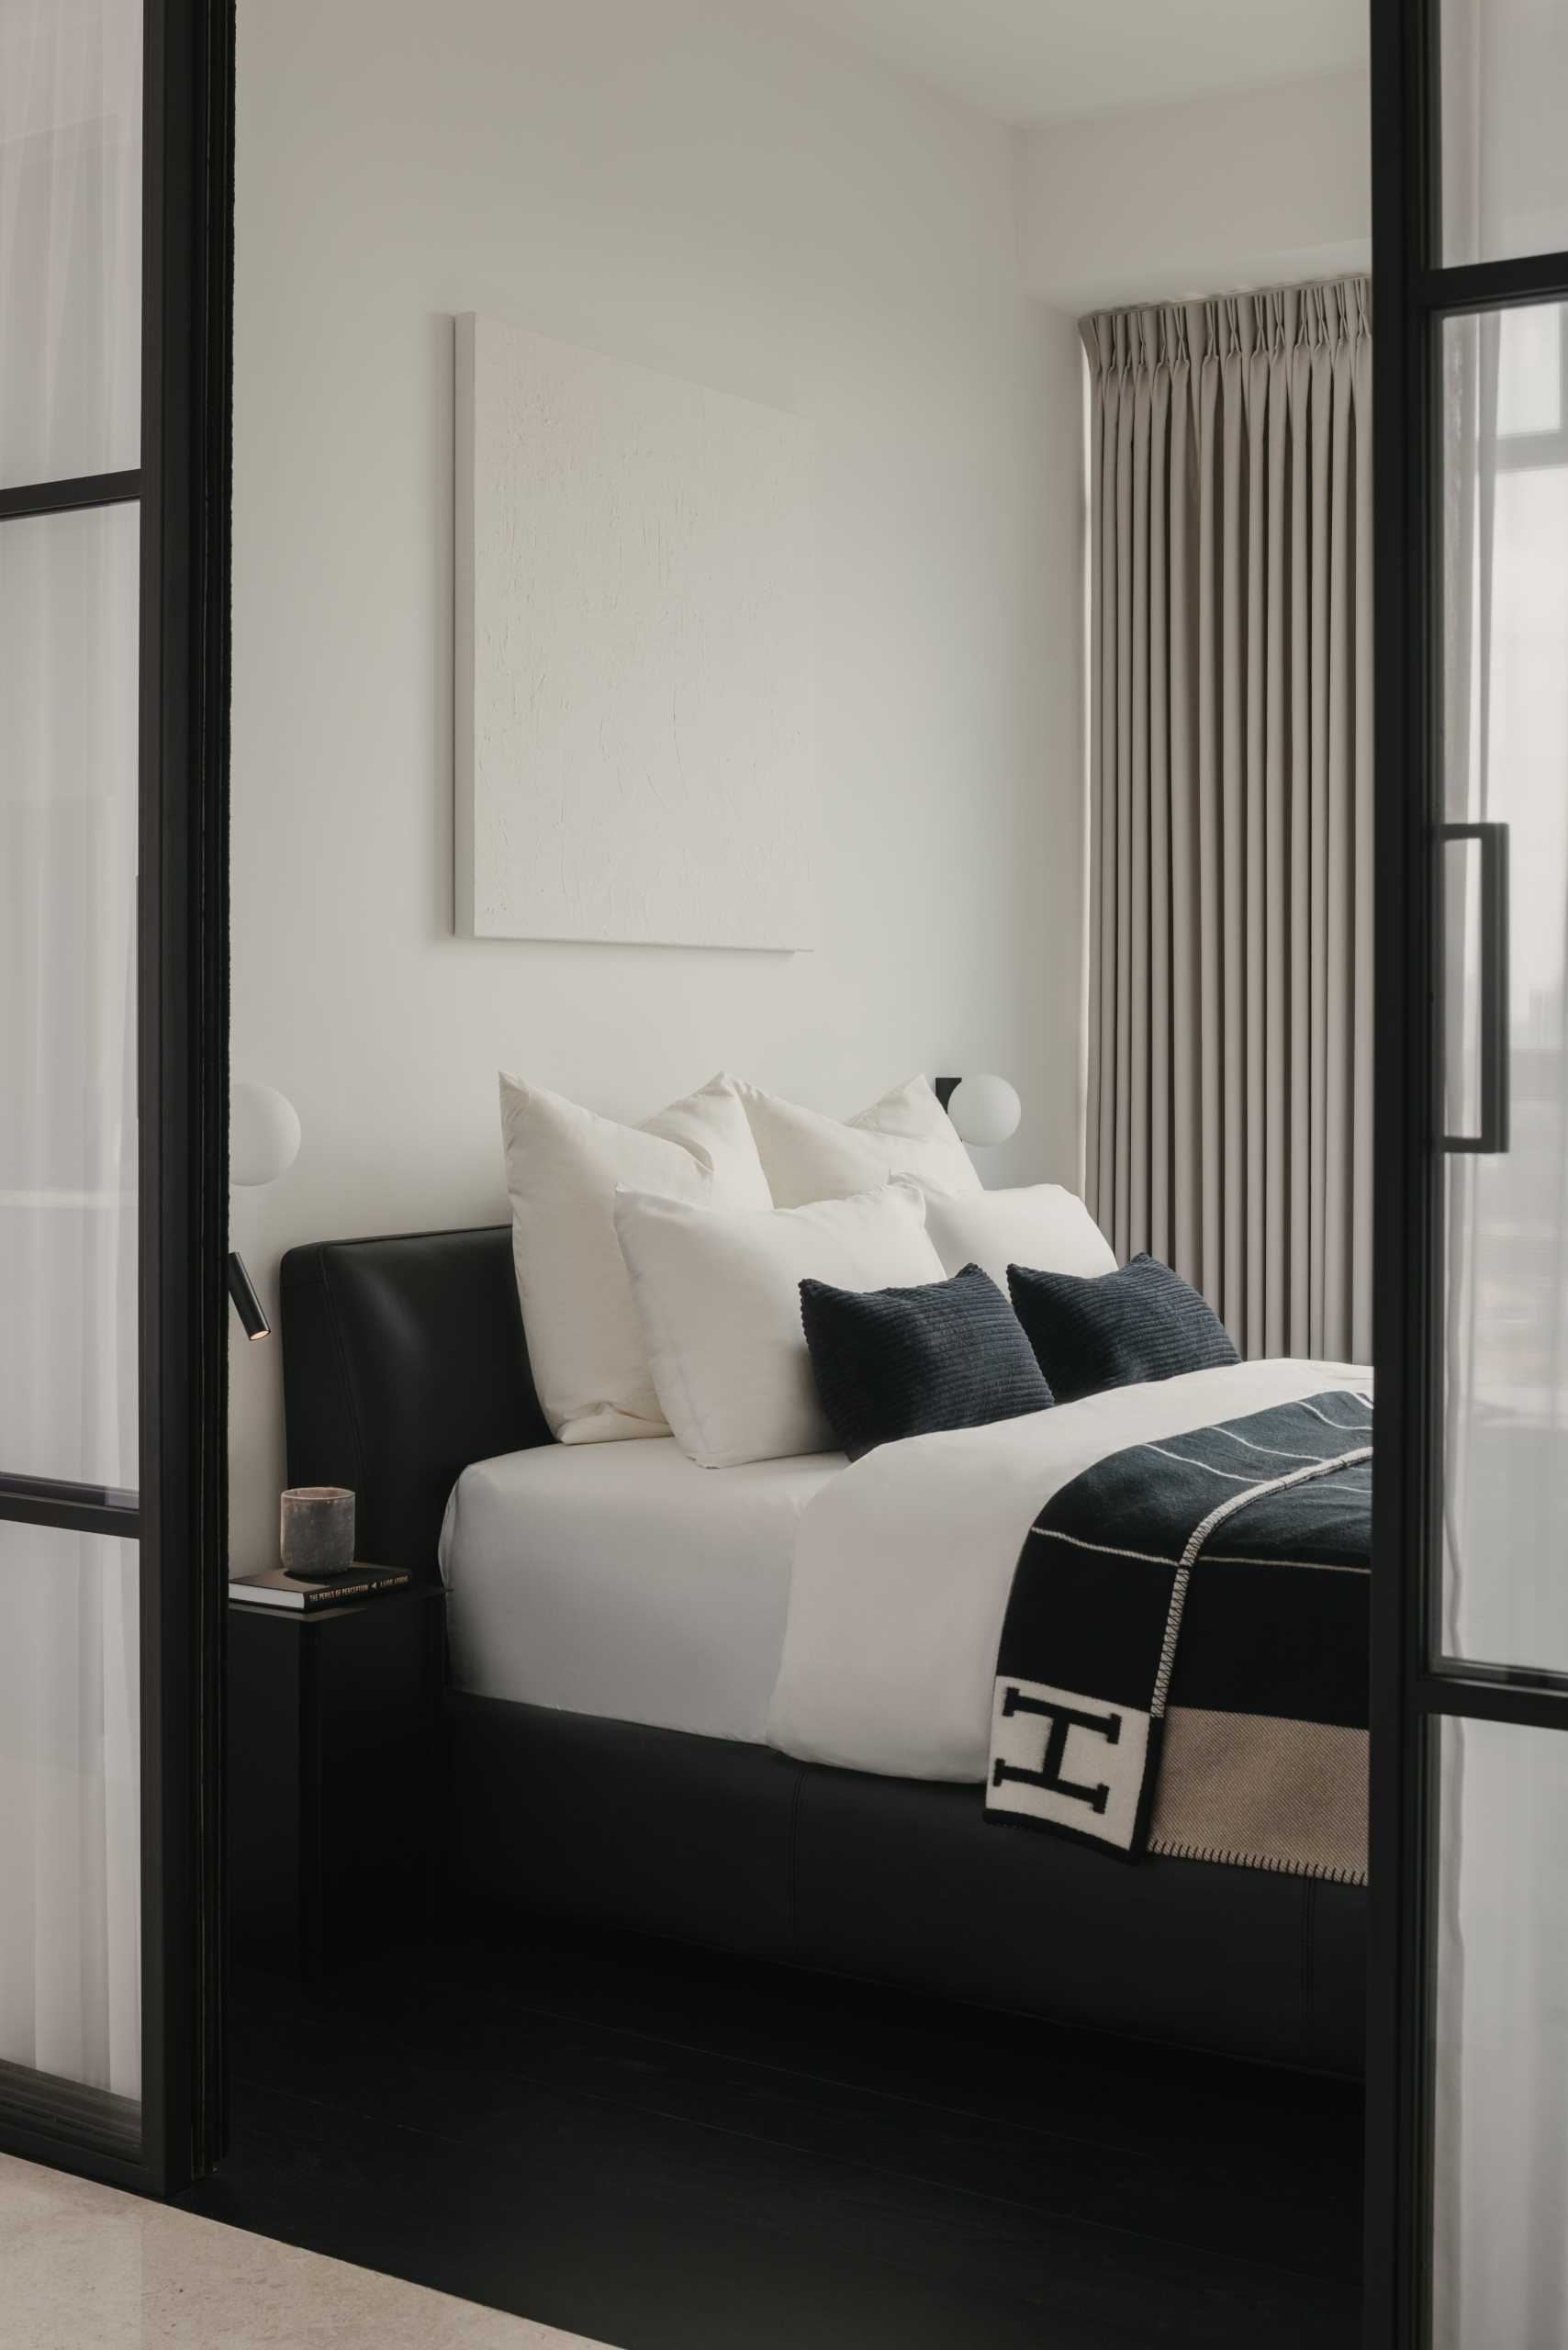 A monochromatic bedroom with black flooring allows the bed frame and bedside table to blend in, while the white artwork almost disappears into its surroundings.